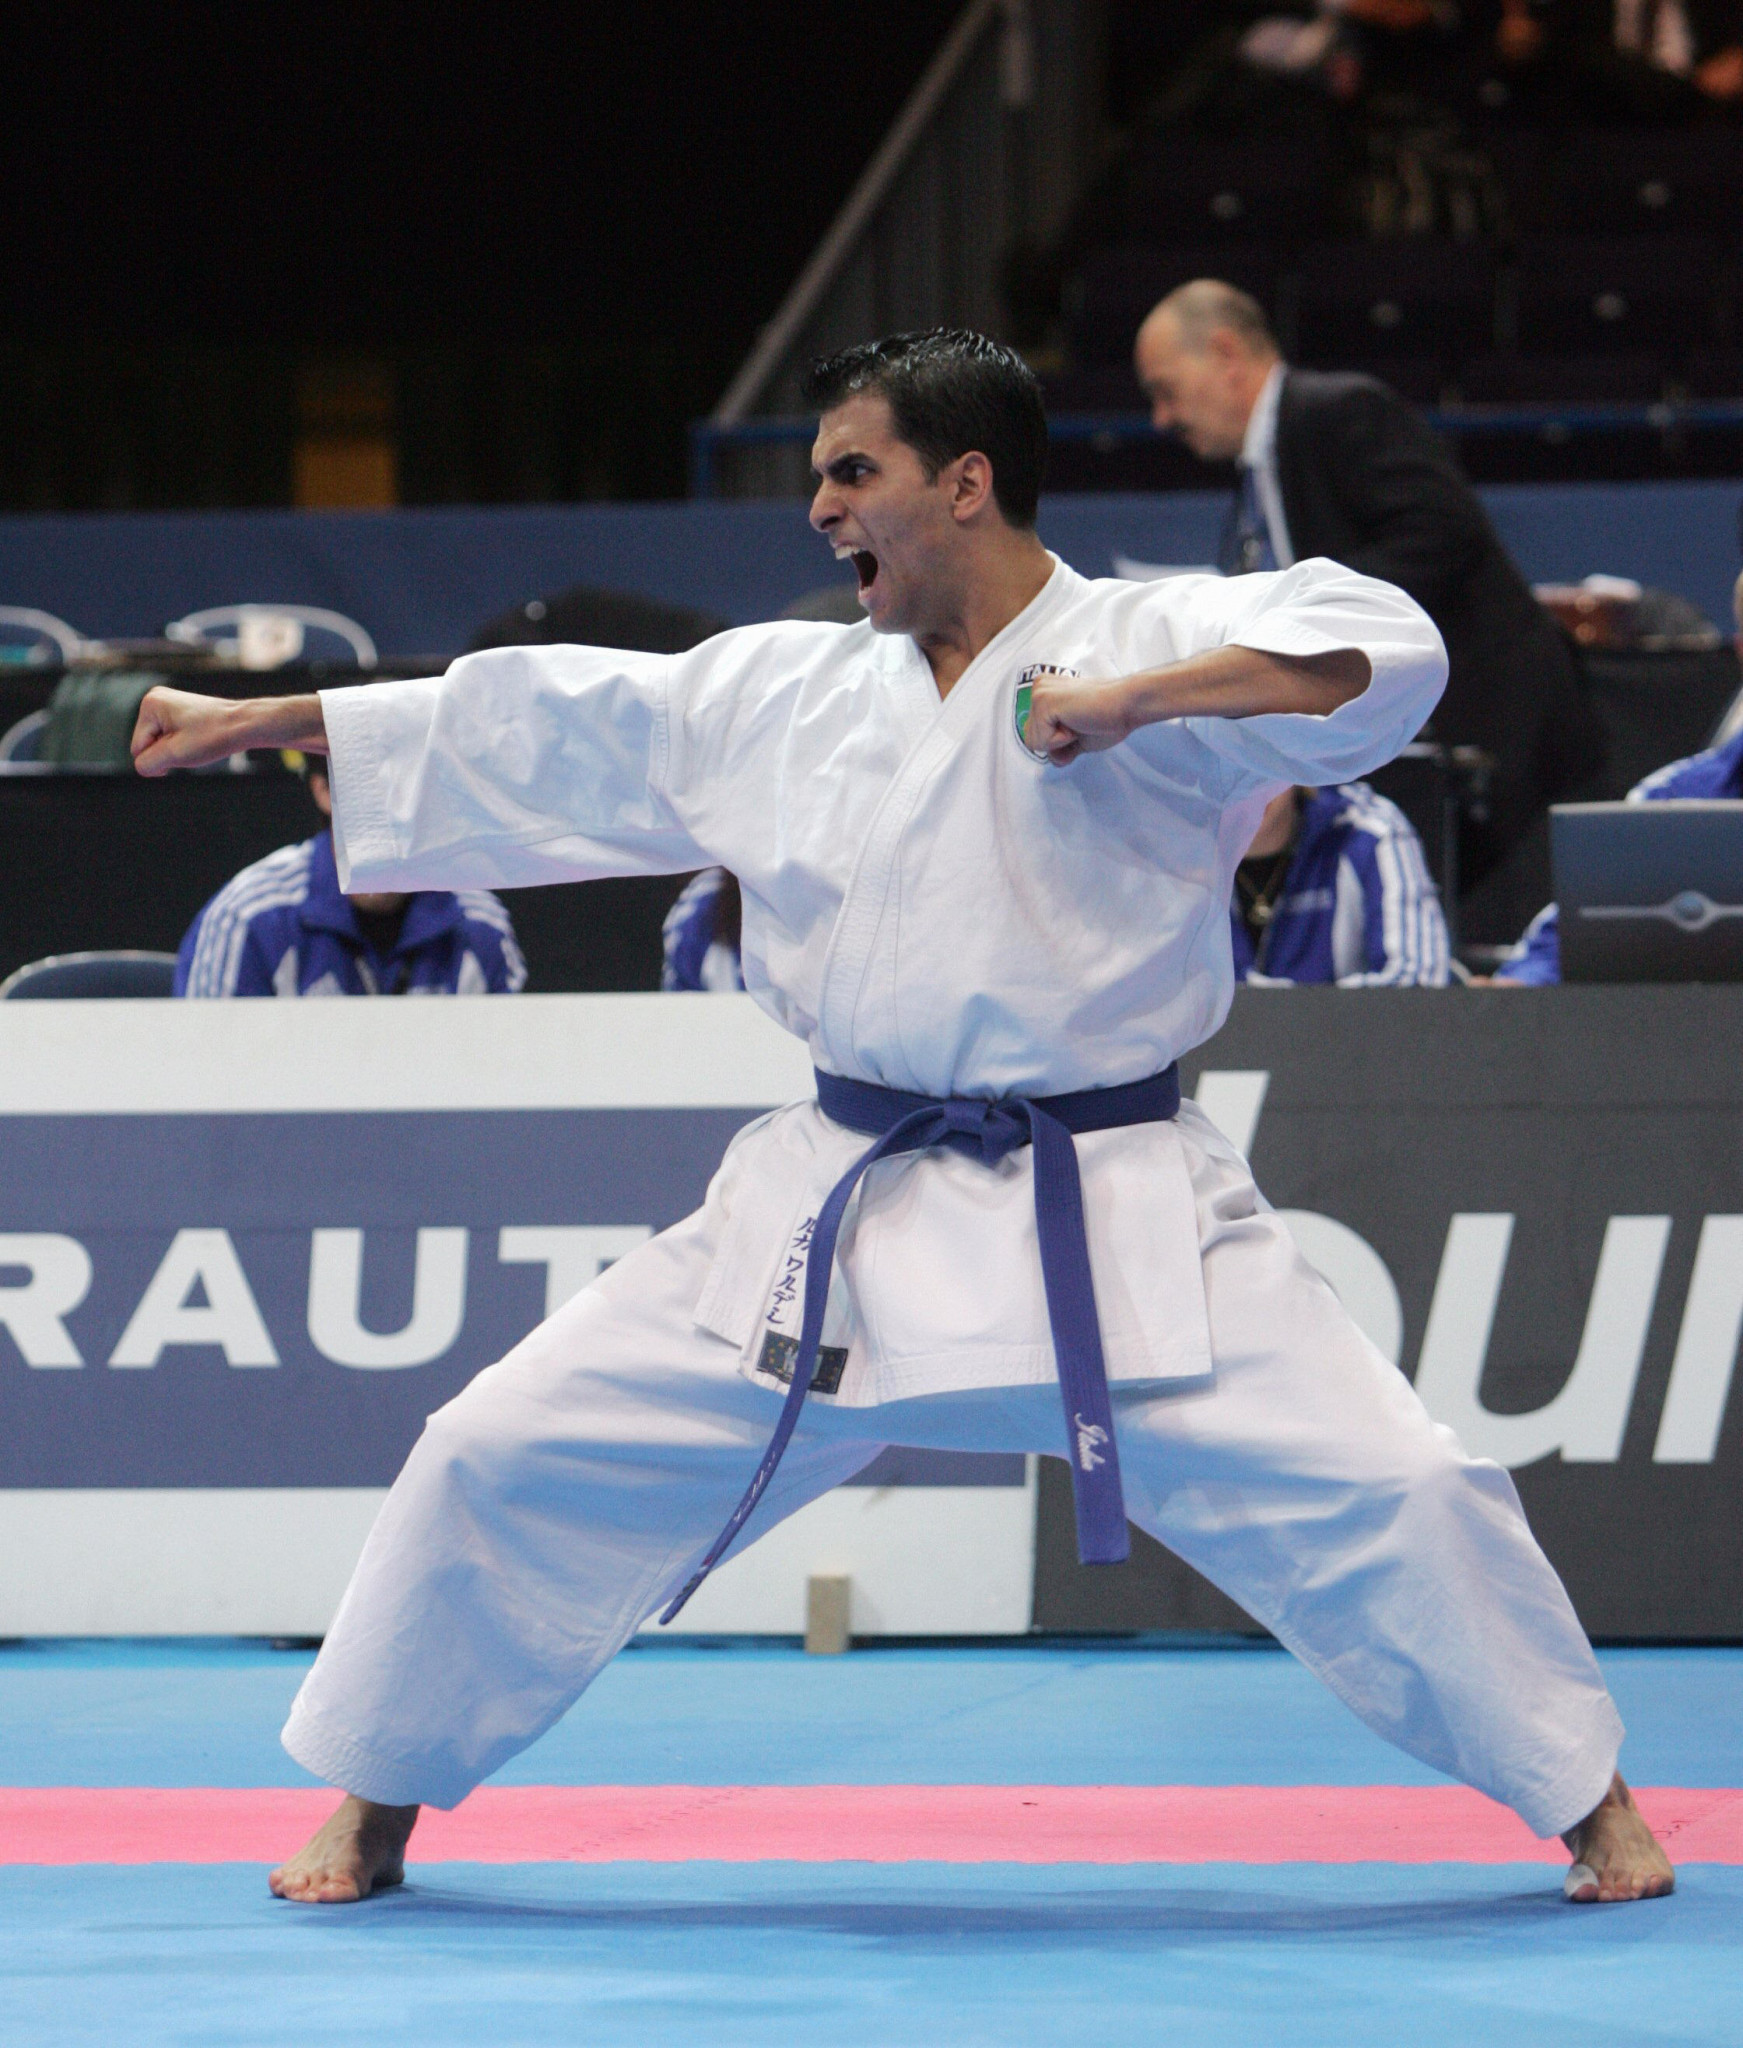 Luca Valdesi is the latest athlete to be involved in the WKF initiative ©Getty Images